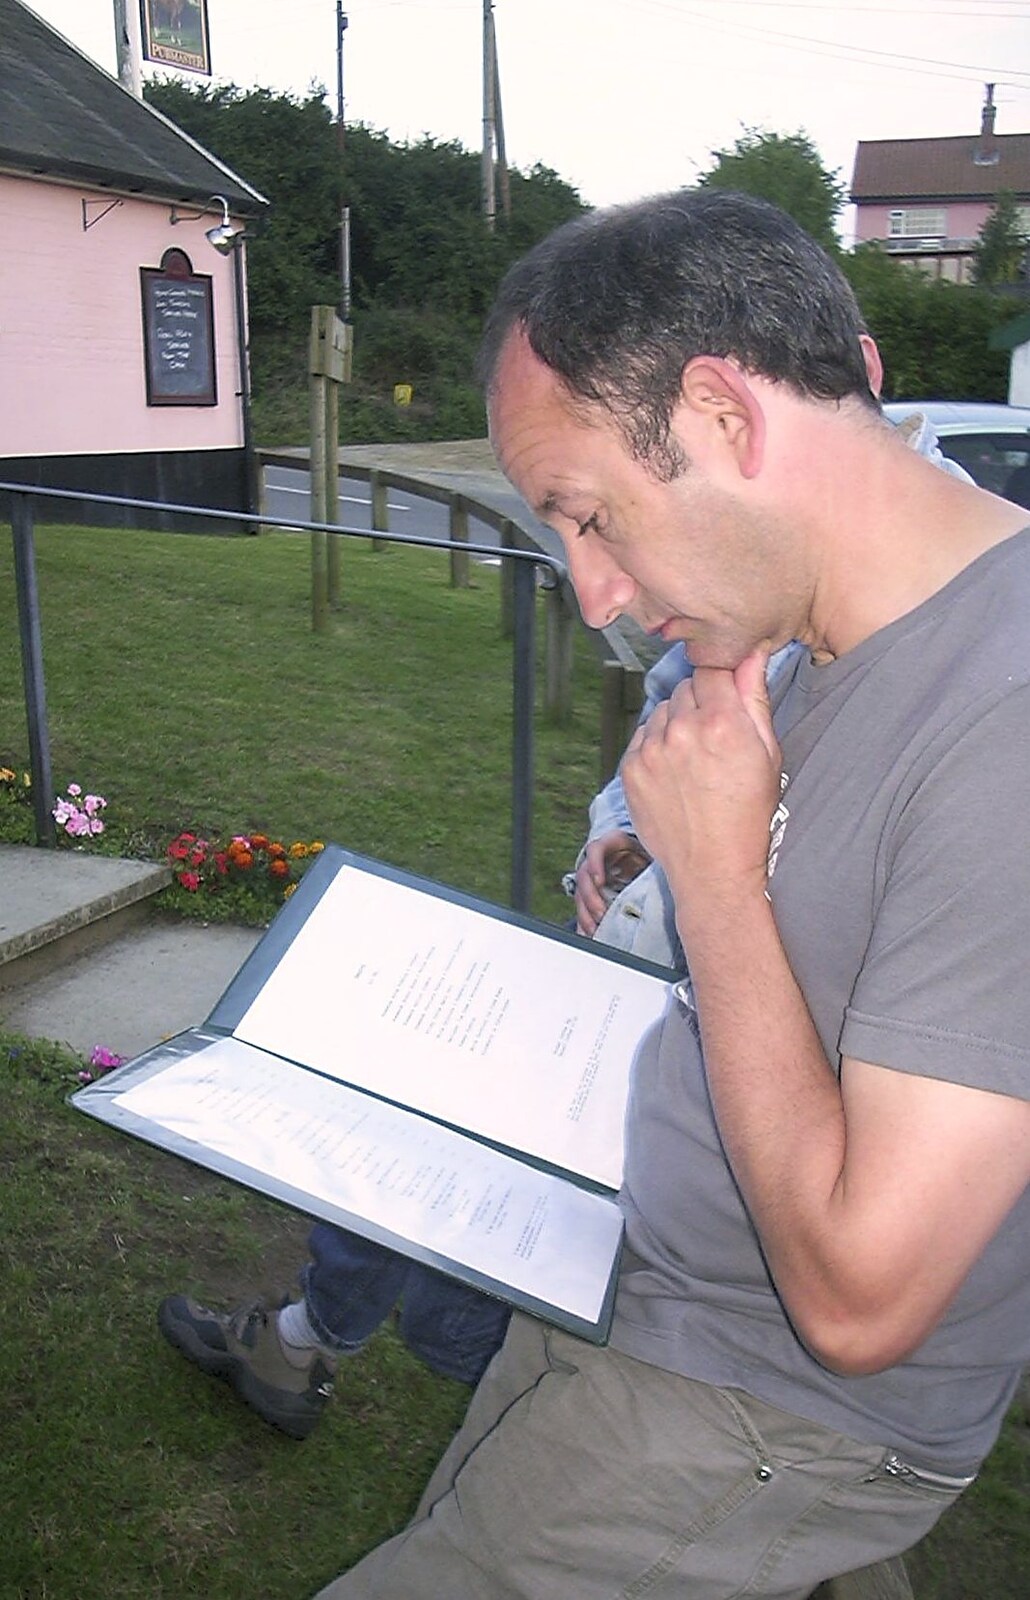 DH scopes out the menu from A BSCC Splinter Group Camping Trip, Shottisham, Suffolk - 13th August 2004